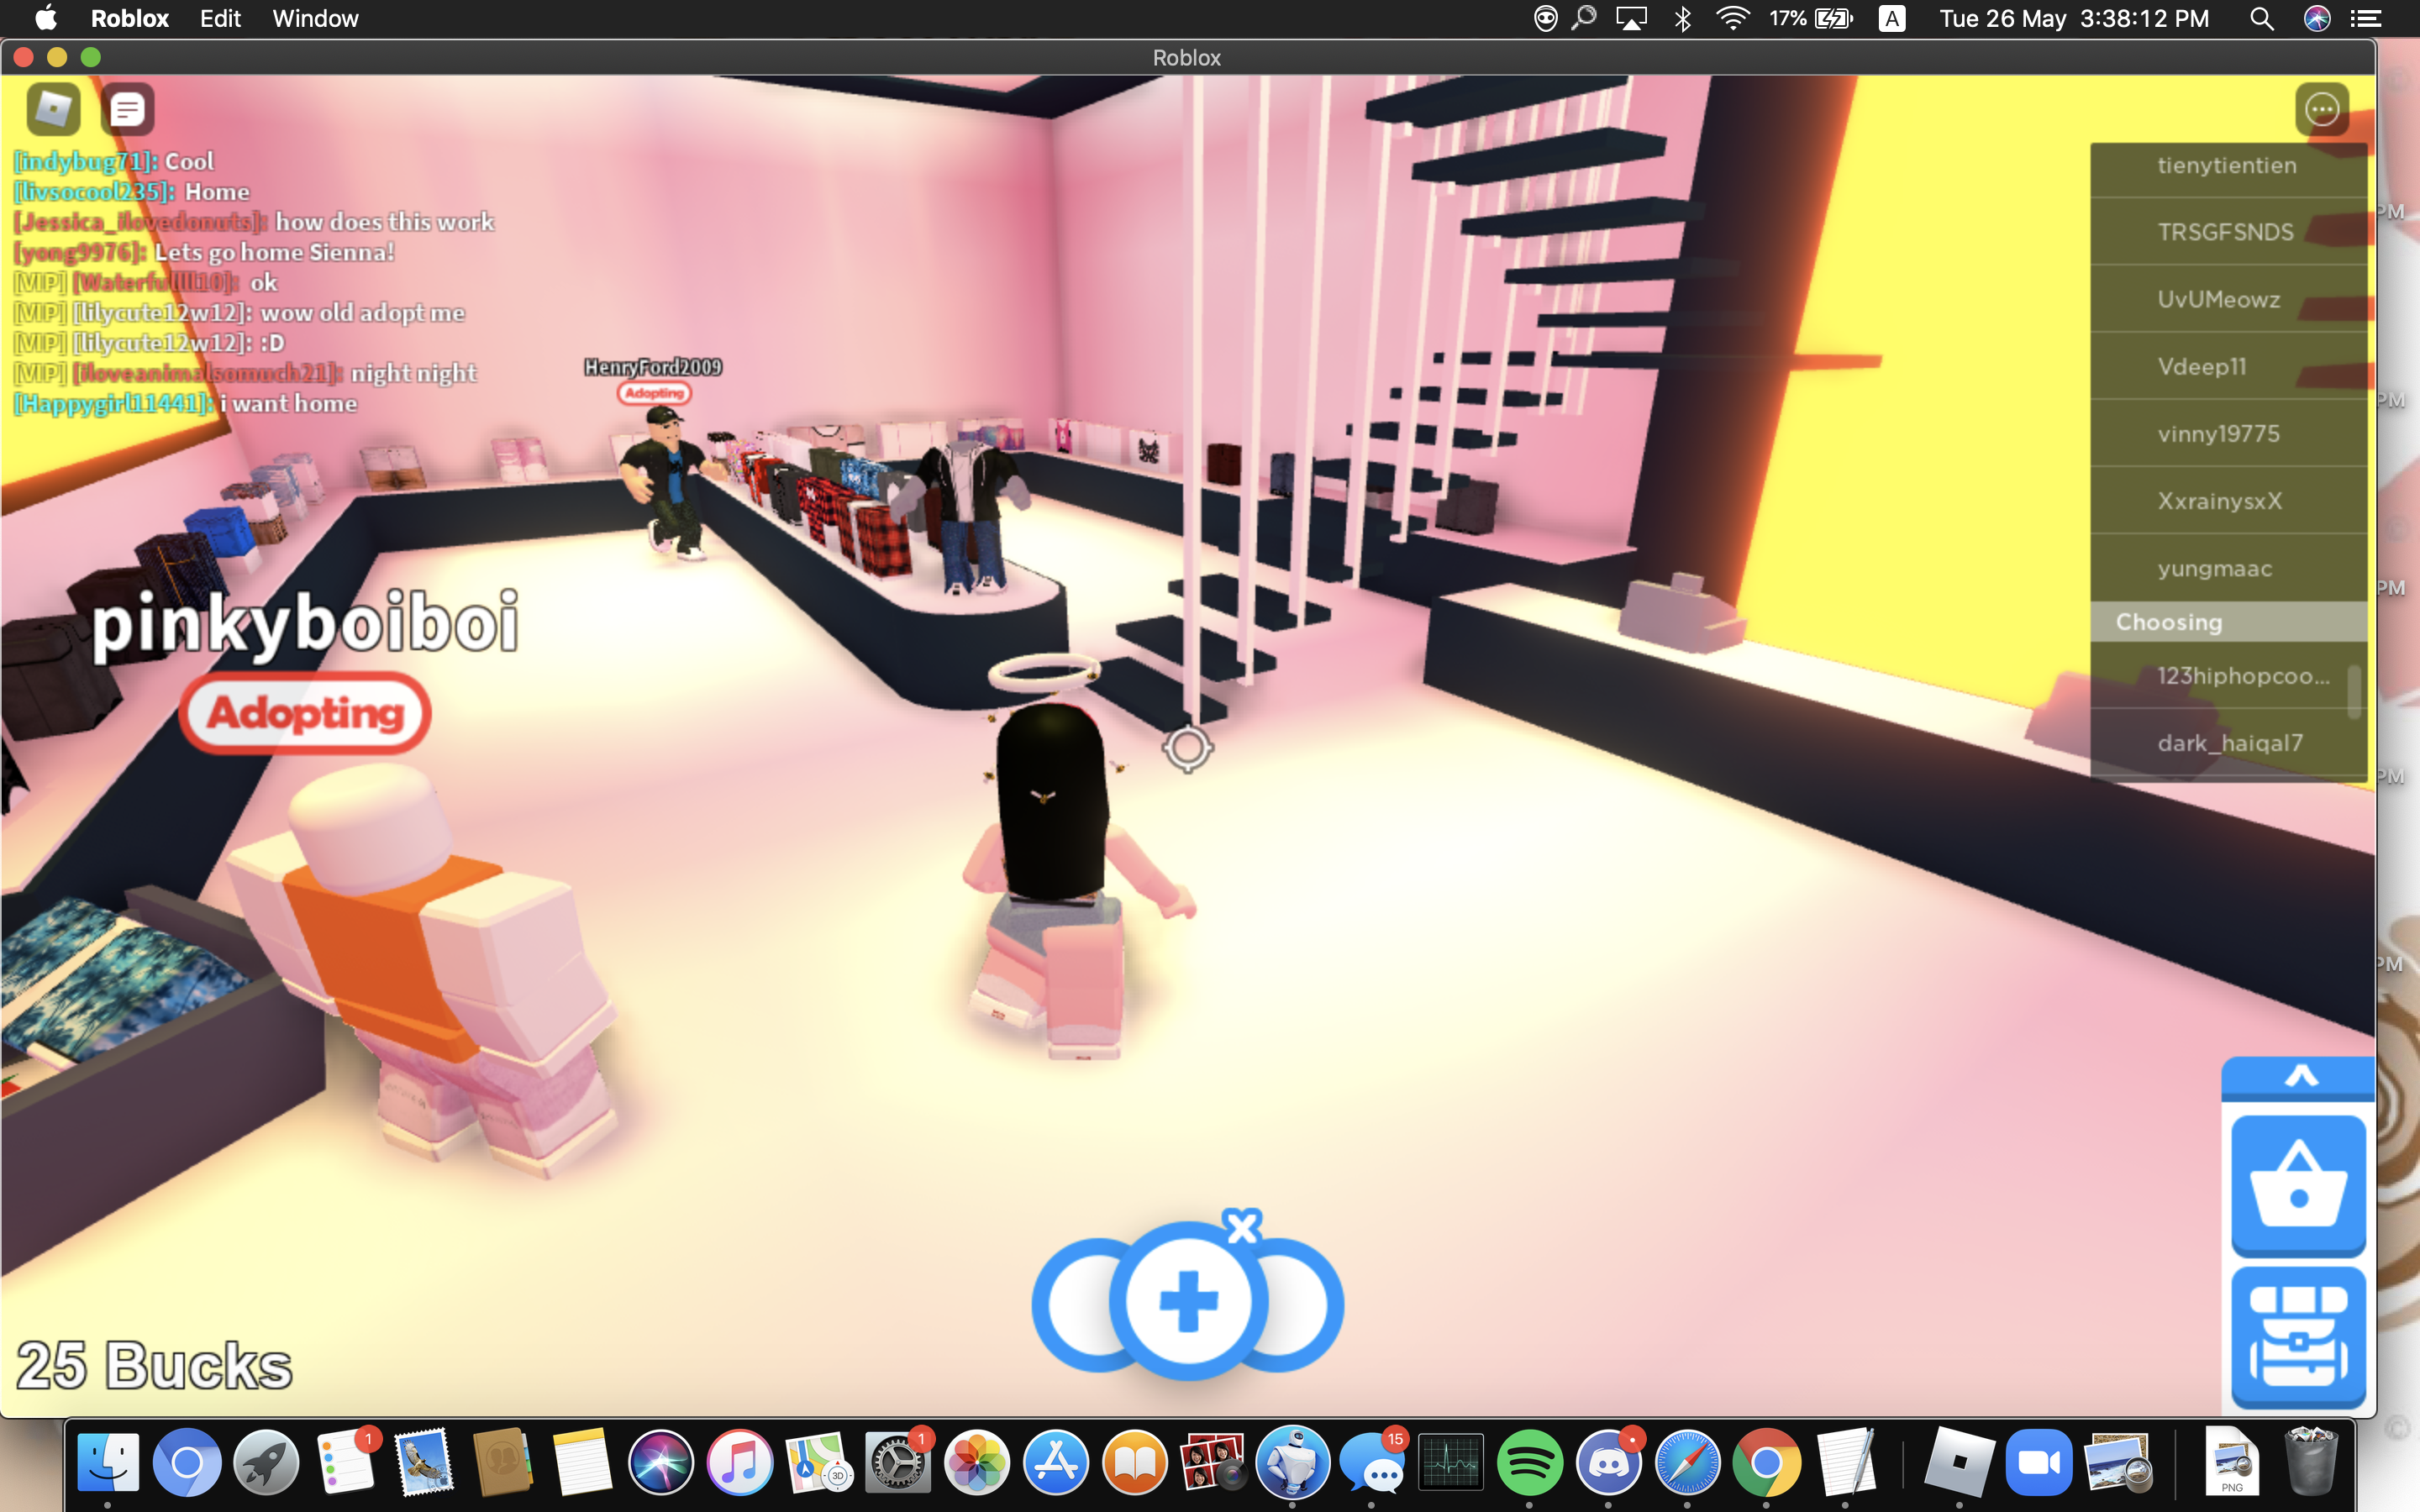 Went And Played Adopt Me Legacy D Link Below Fandom - roblox.com/games/adopt me